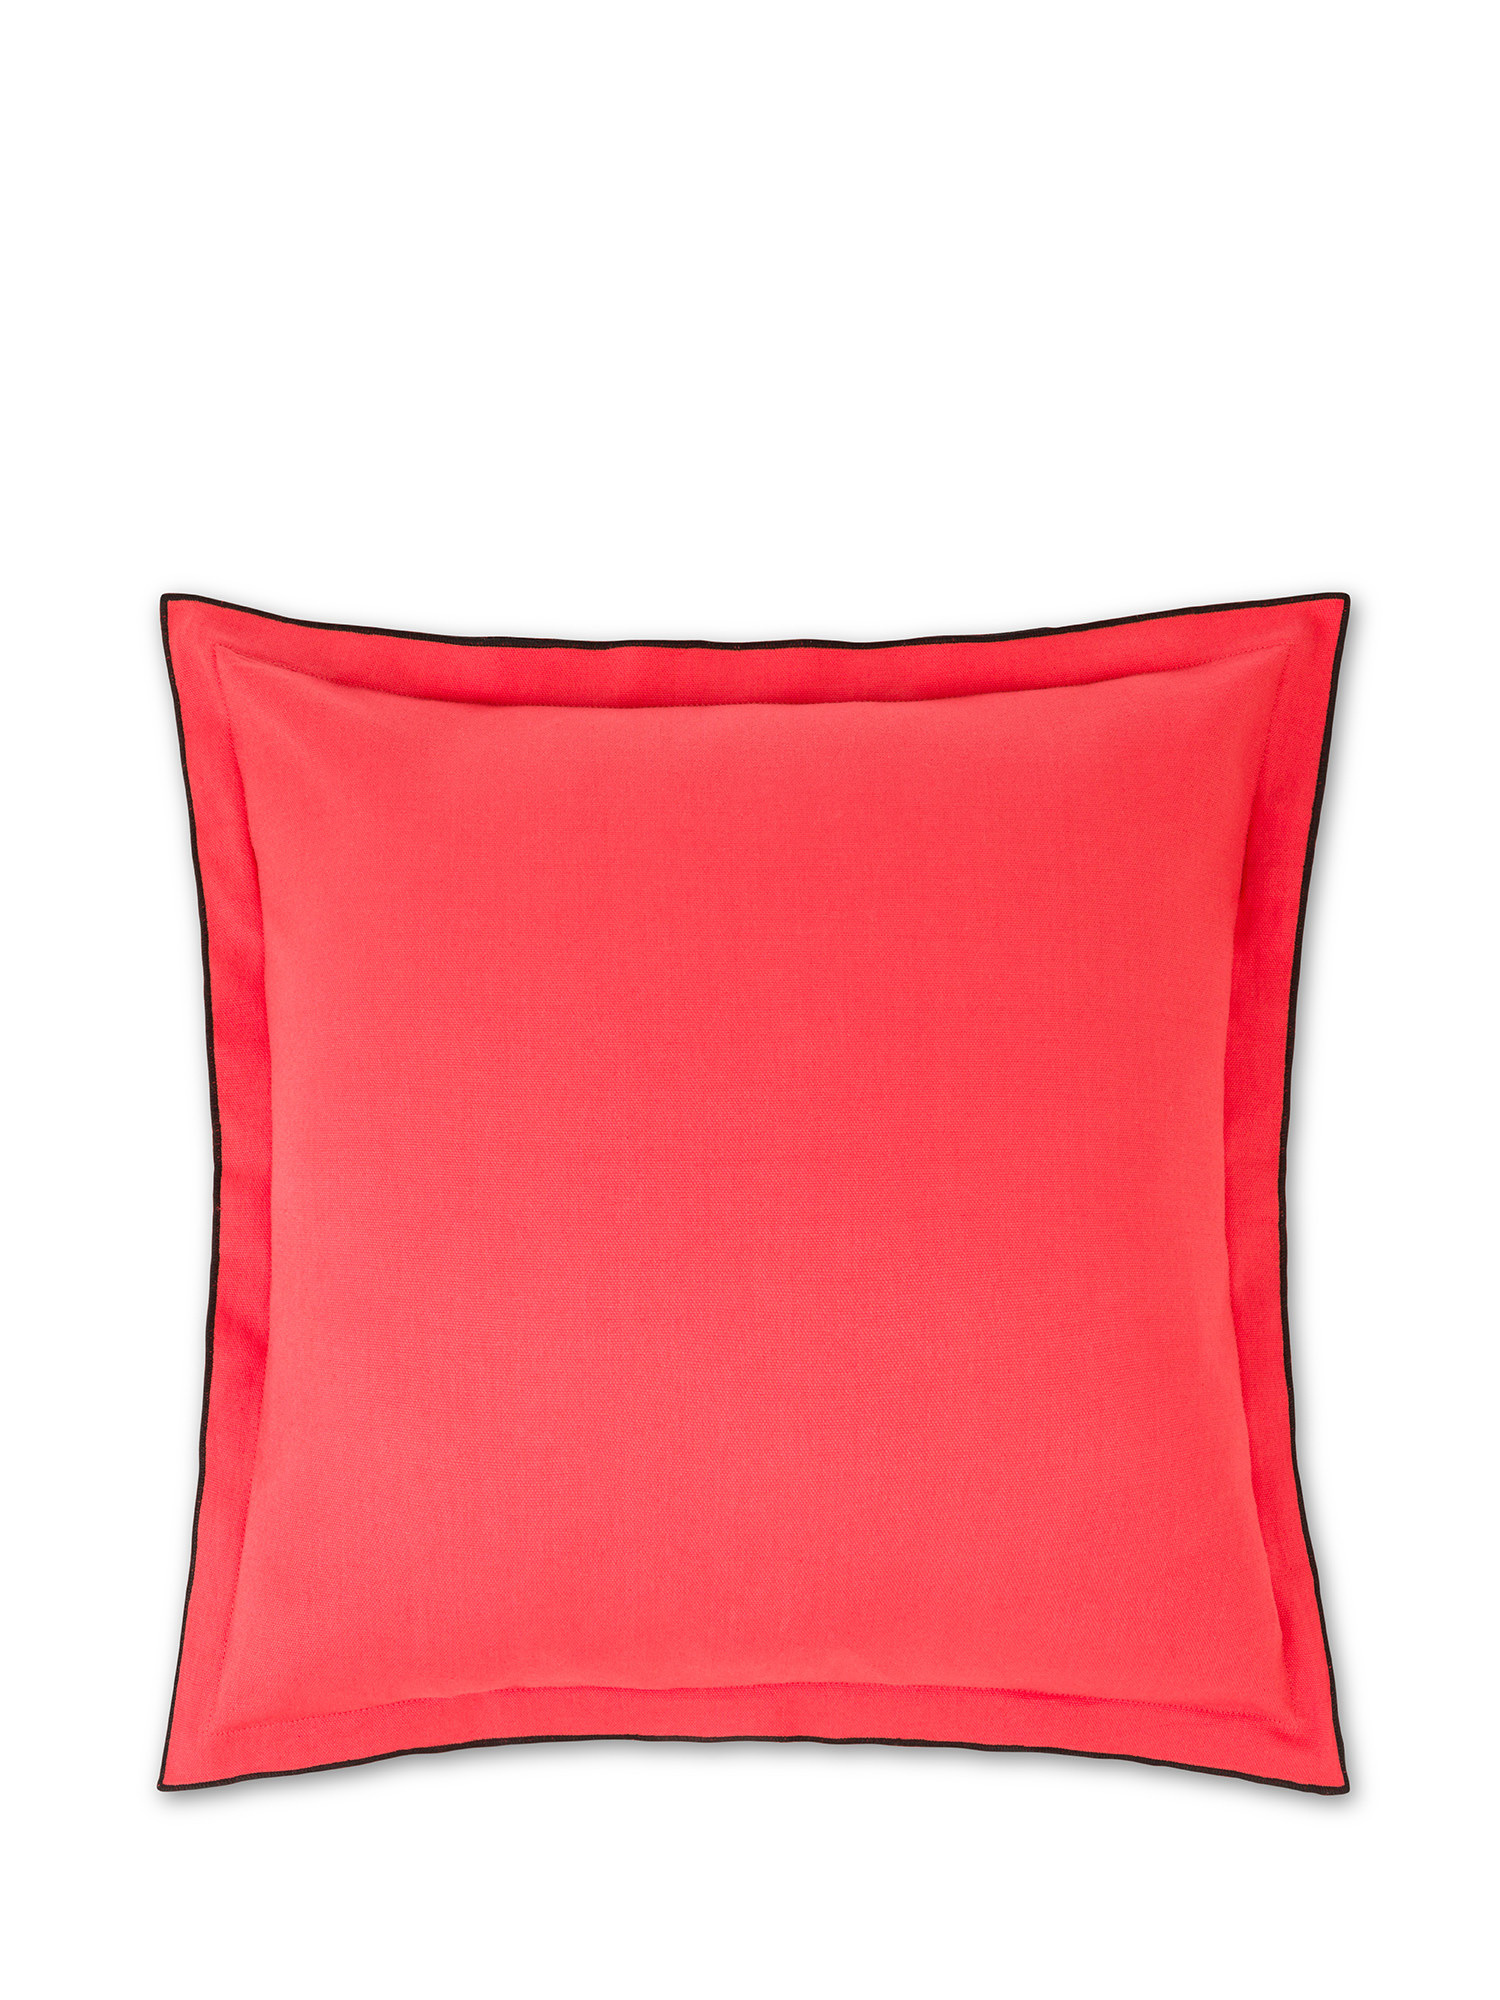 Cotton cushion with overlock border 45x45cm, Red, large image number 0